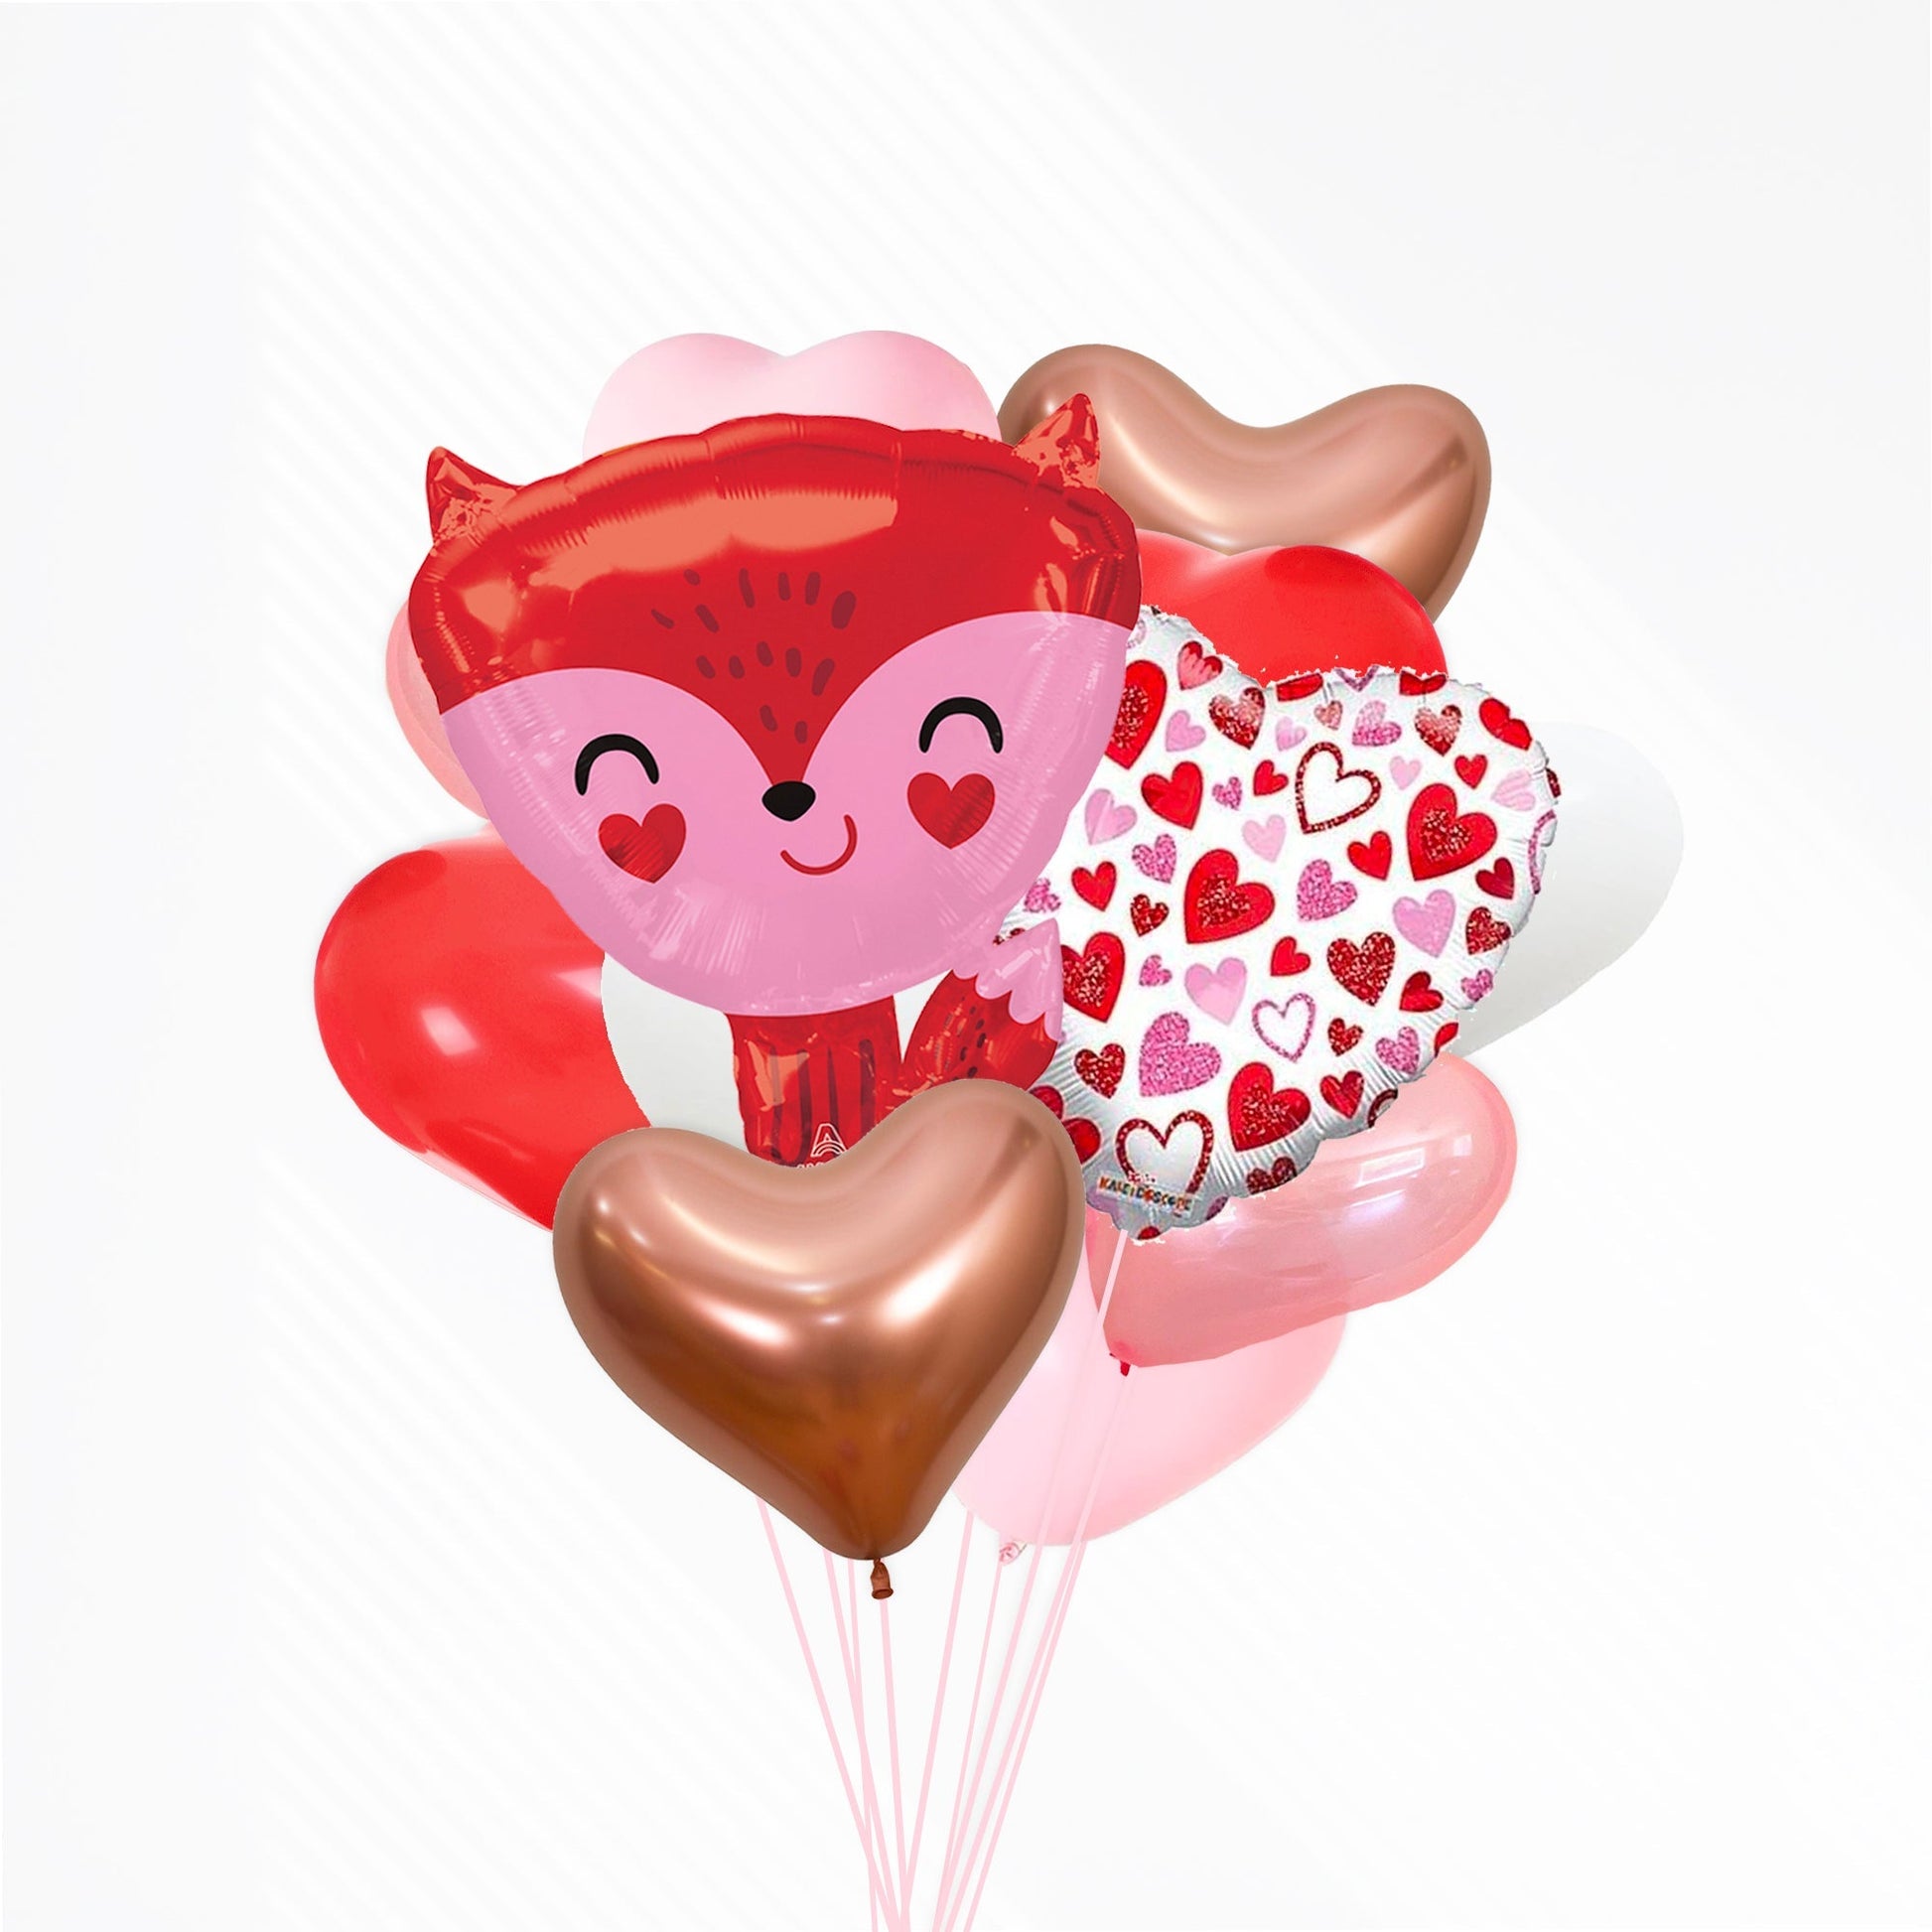 Red & Pink Cute Fox Mylar Balloon (18 inches) - Ellie's Party Supply